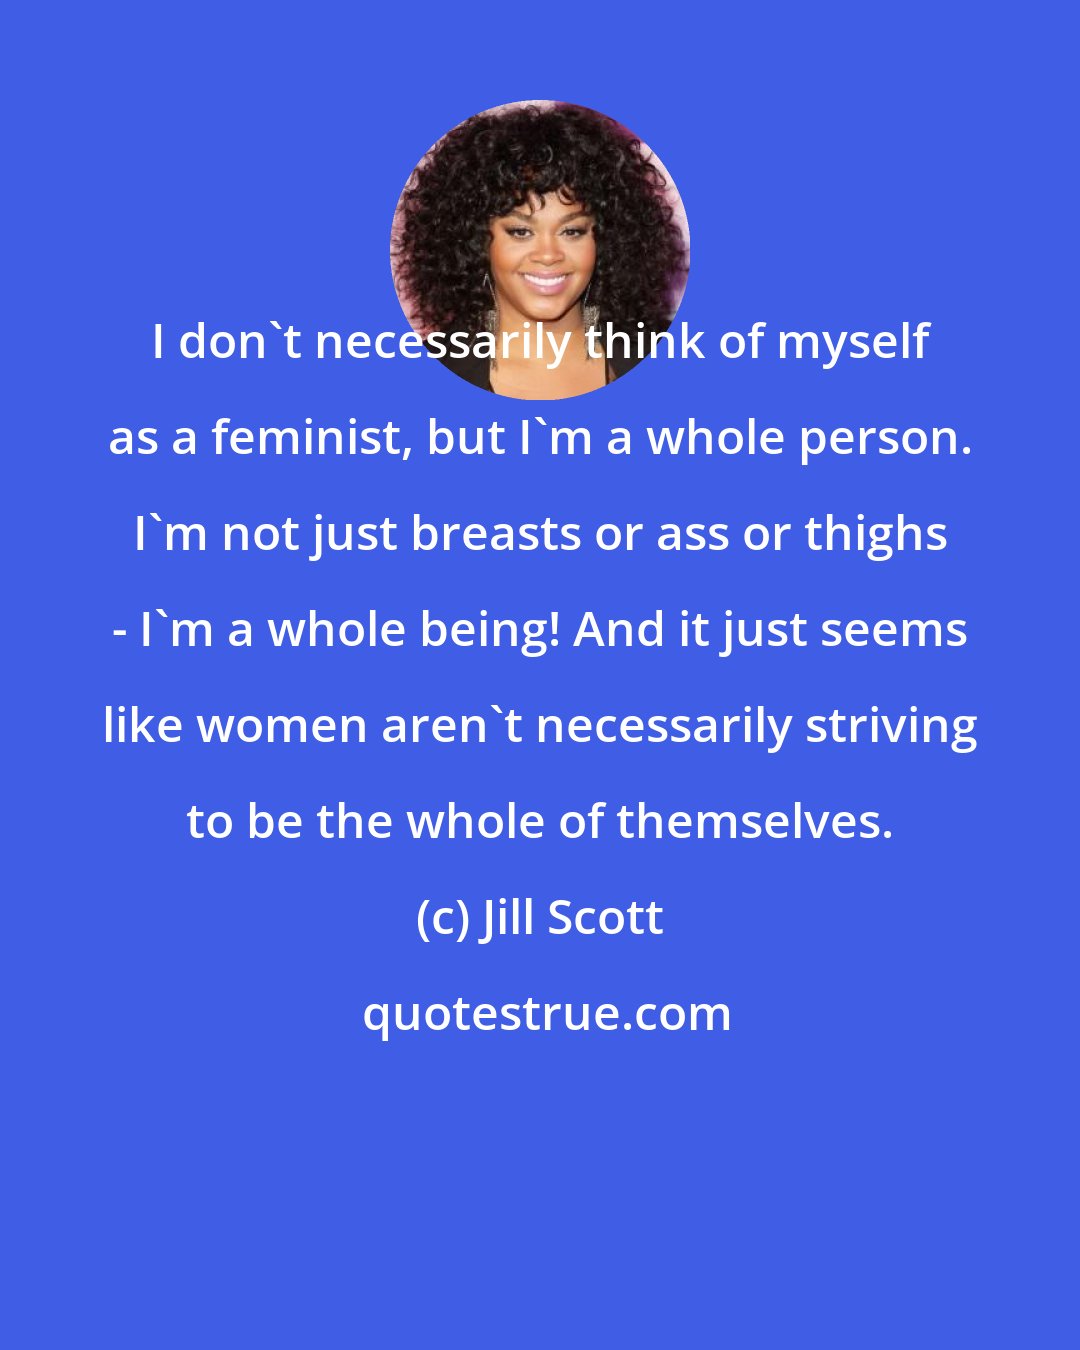 Jill Scott: I don't necessarily think of myself as a feminist, but I'm a whole person. I'm not just breasts or ass or thighs - I'm a whole being! And it just seems like women aren't necessarily striving to be the whole of themselves.